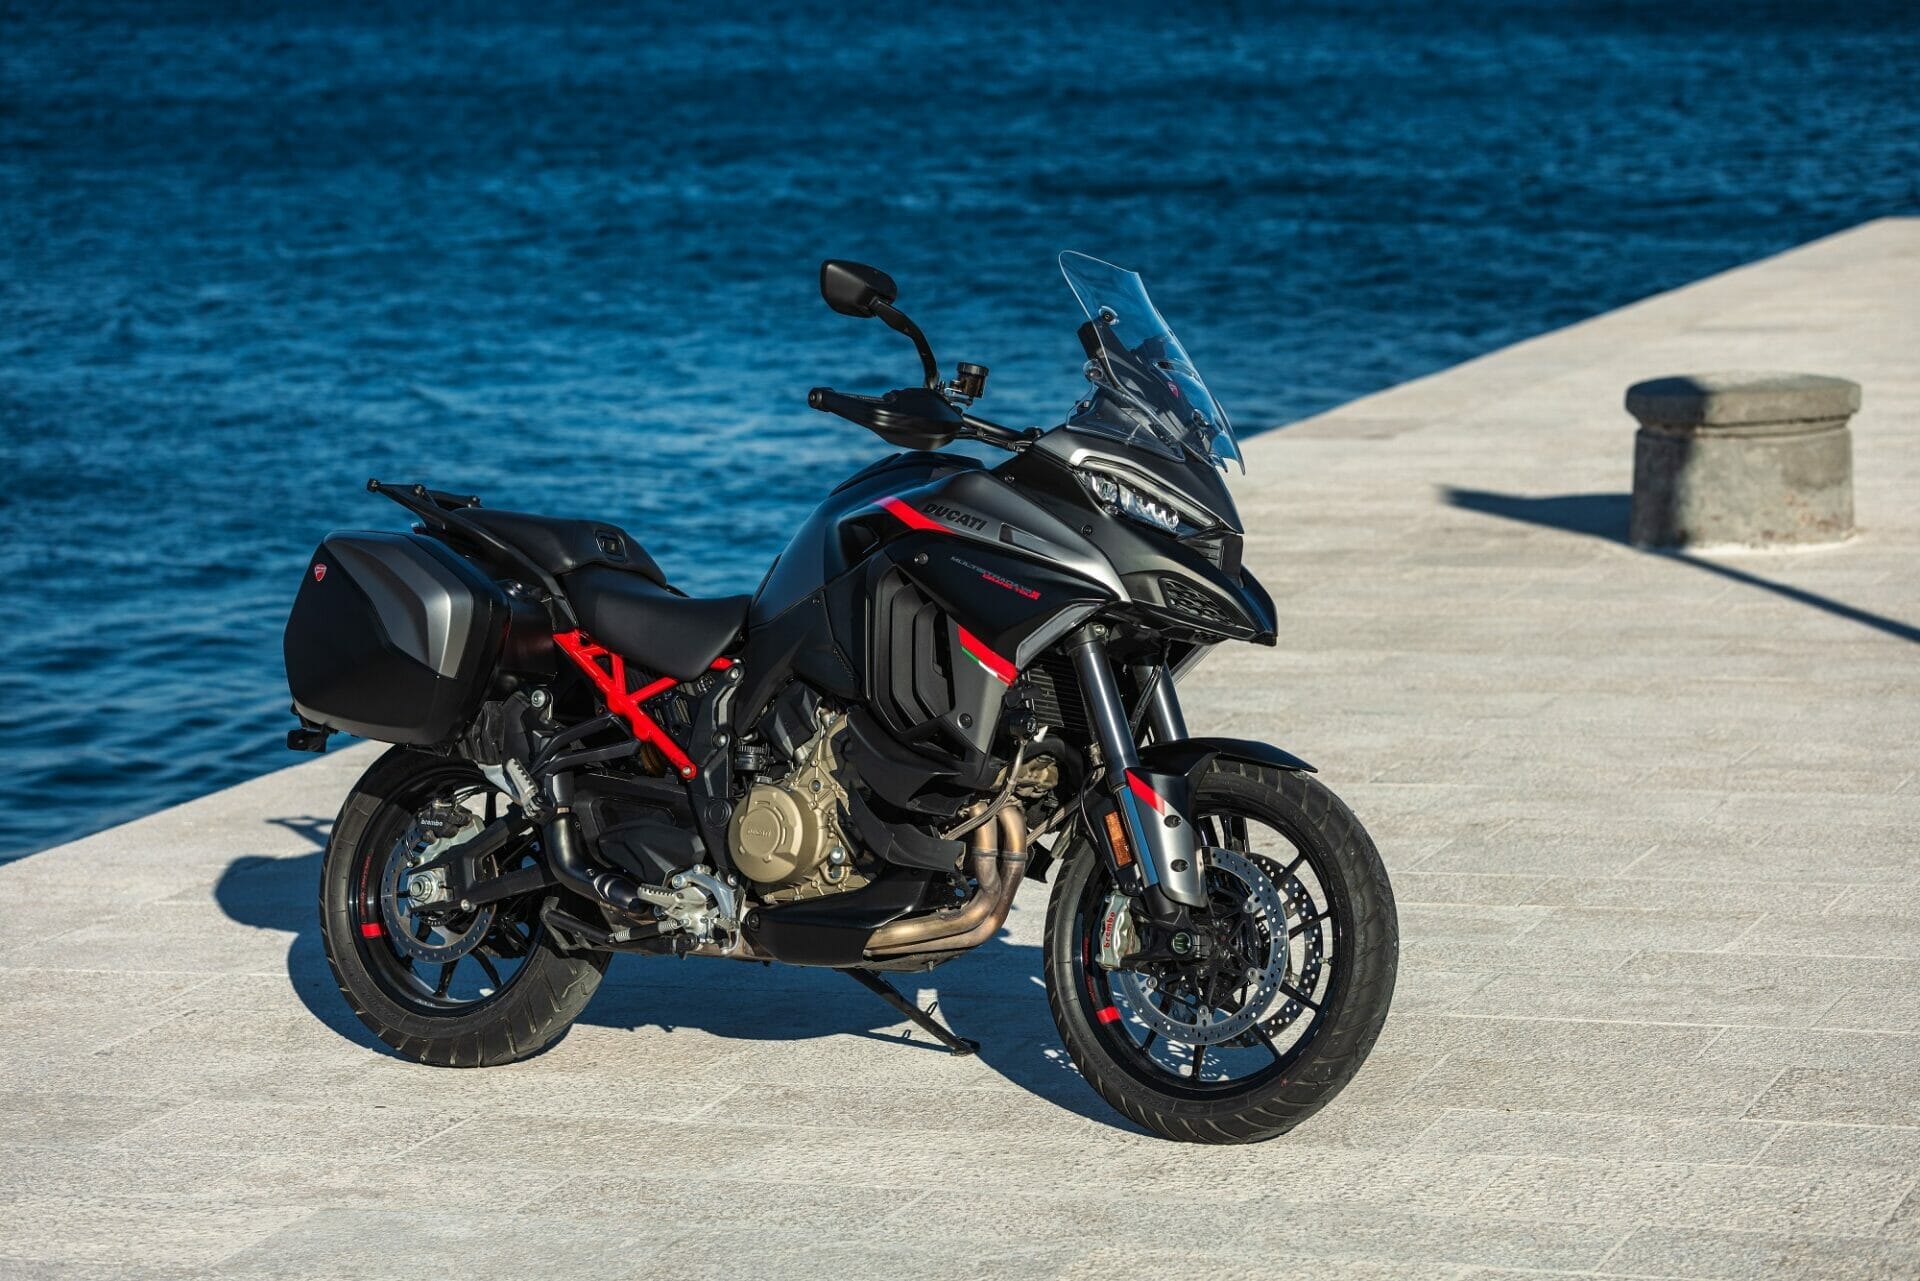 Multistrada V4 S Grand Tour: Ducati’s answer for luxury long-distance riding.